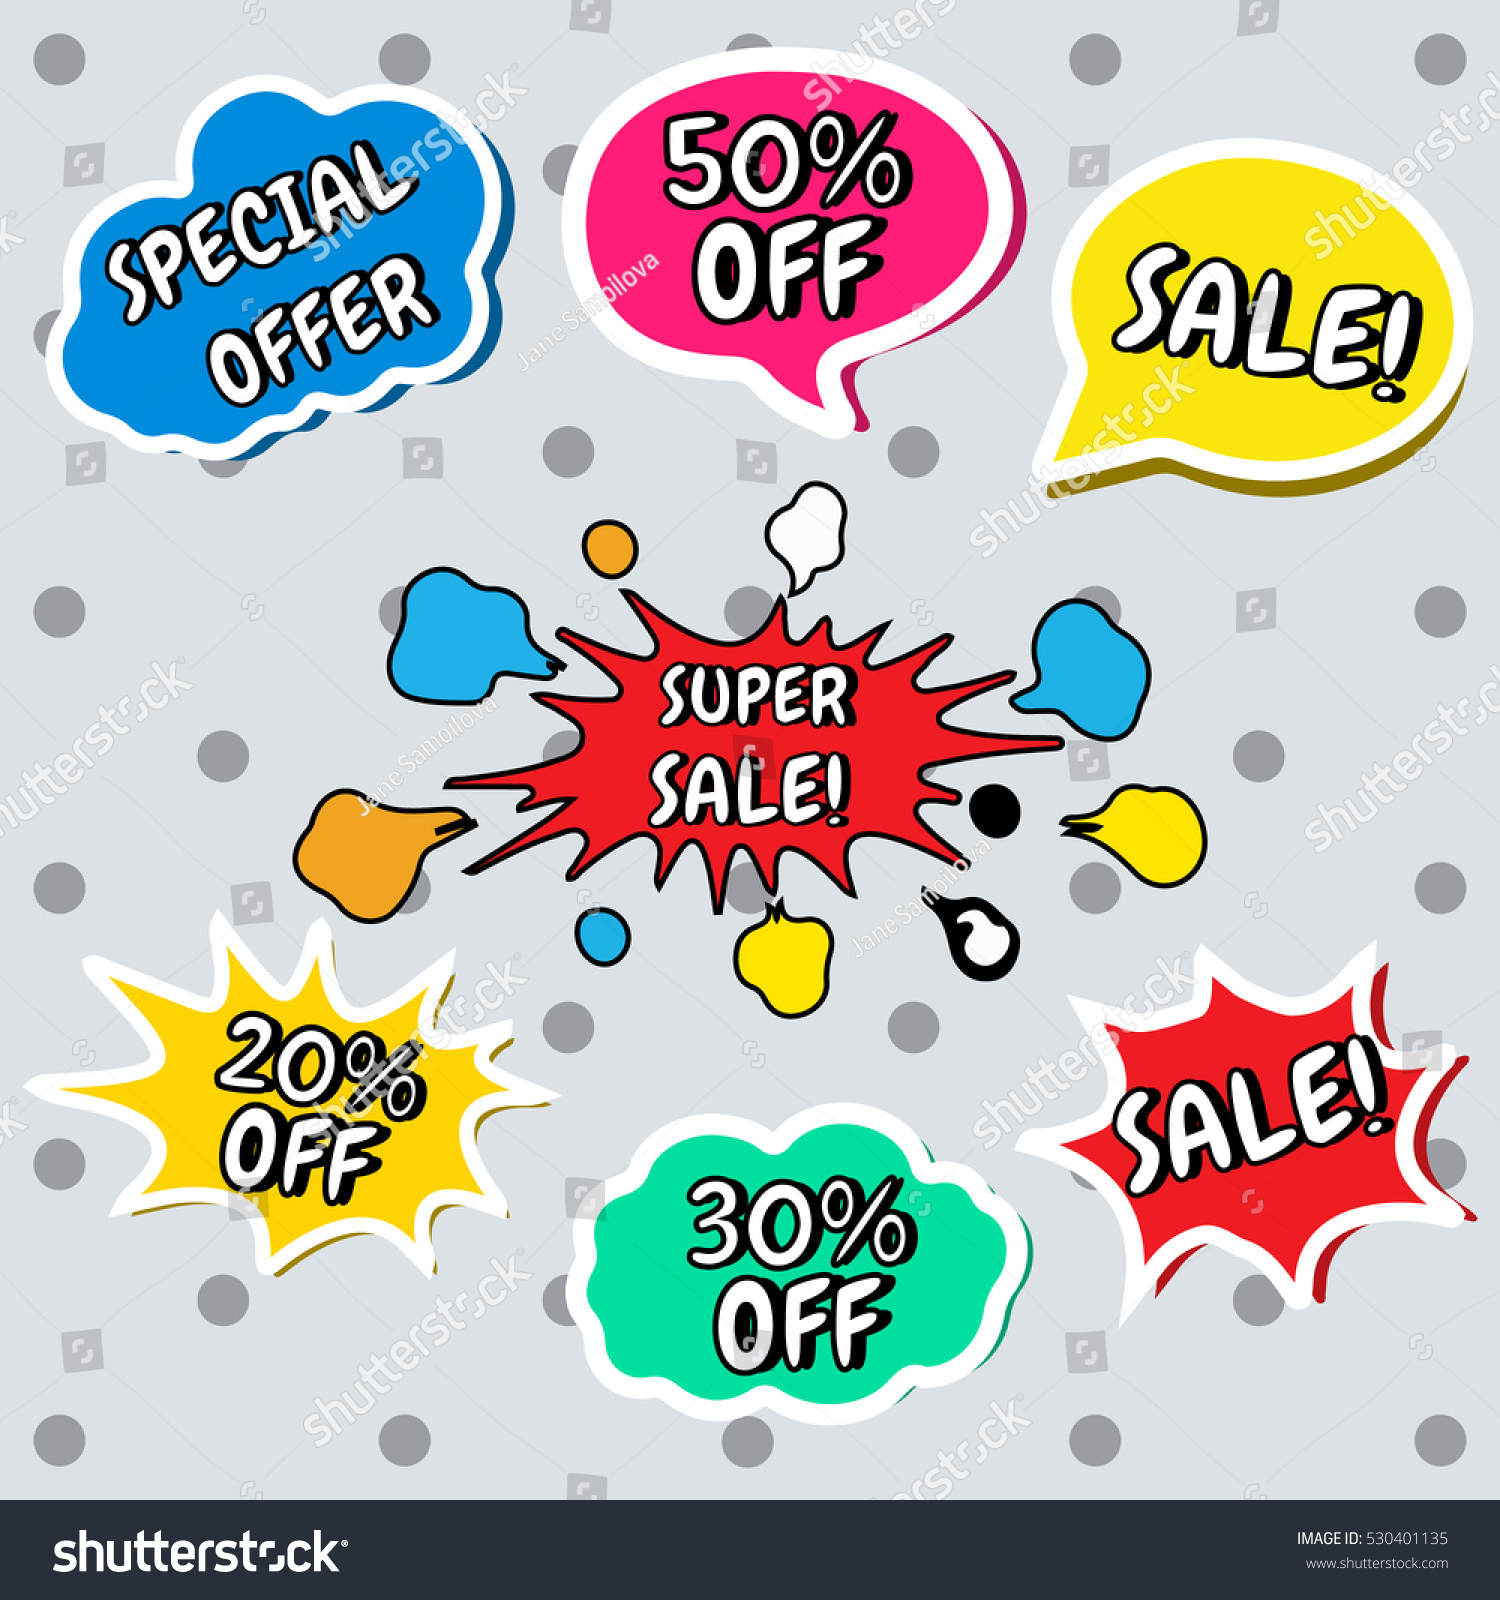 Set of vector colorful stickers in cartoon, comics style with text in speech bubbles. Sale, % off, special offer, super sale. Website badges. Black friday. Online shopping #530401135